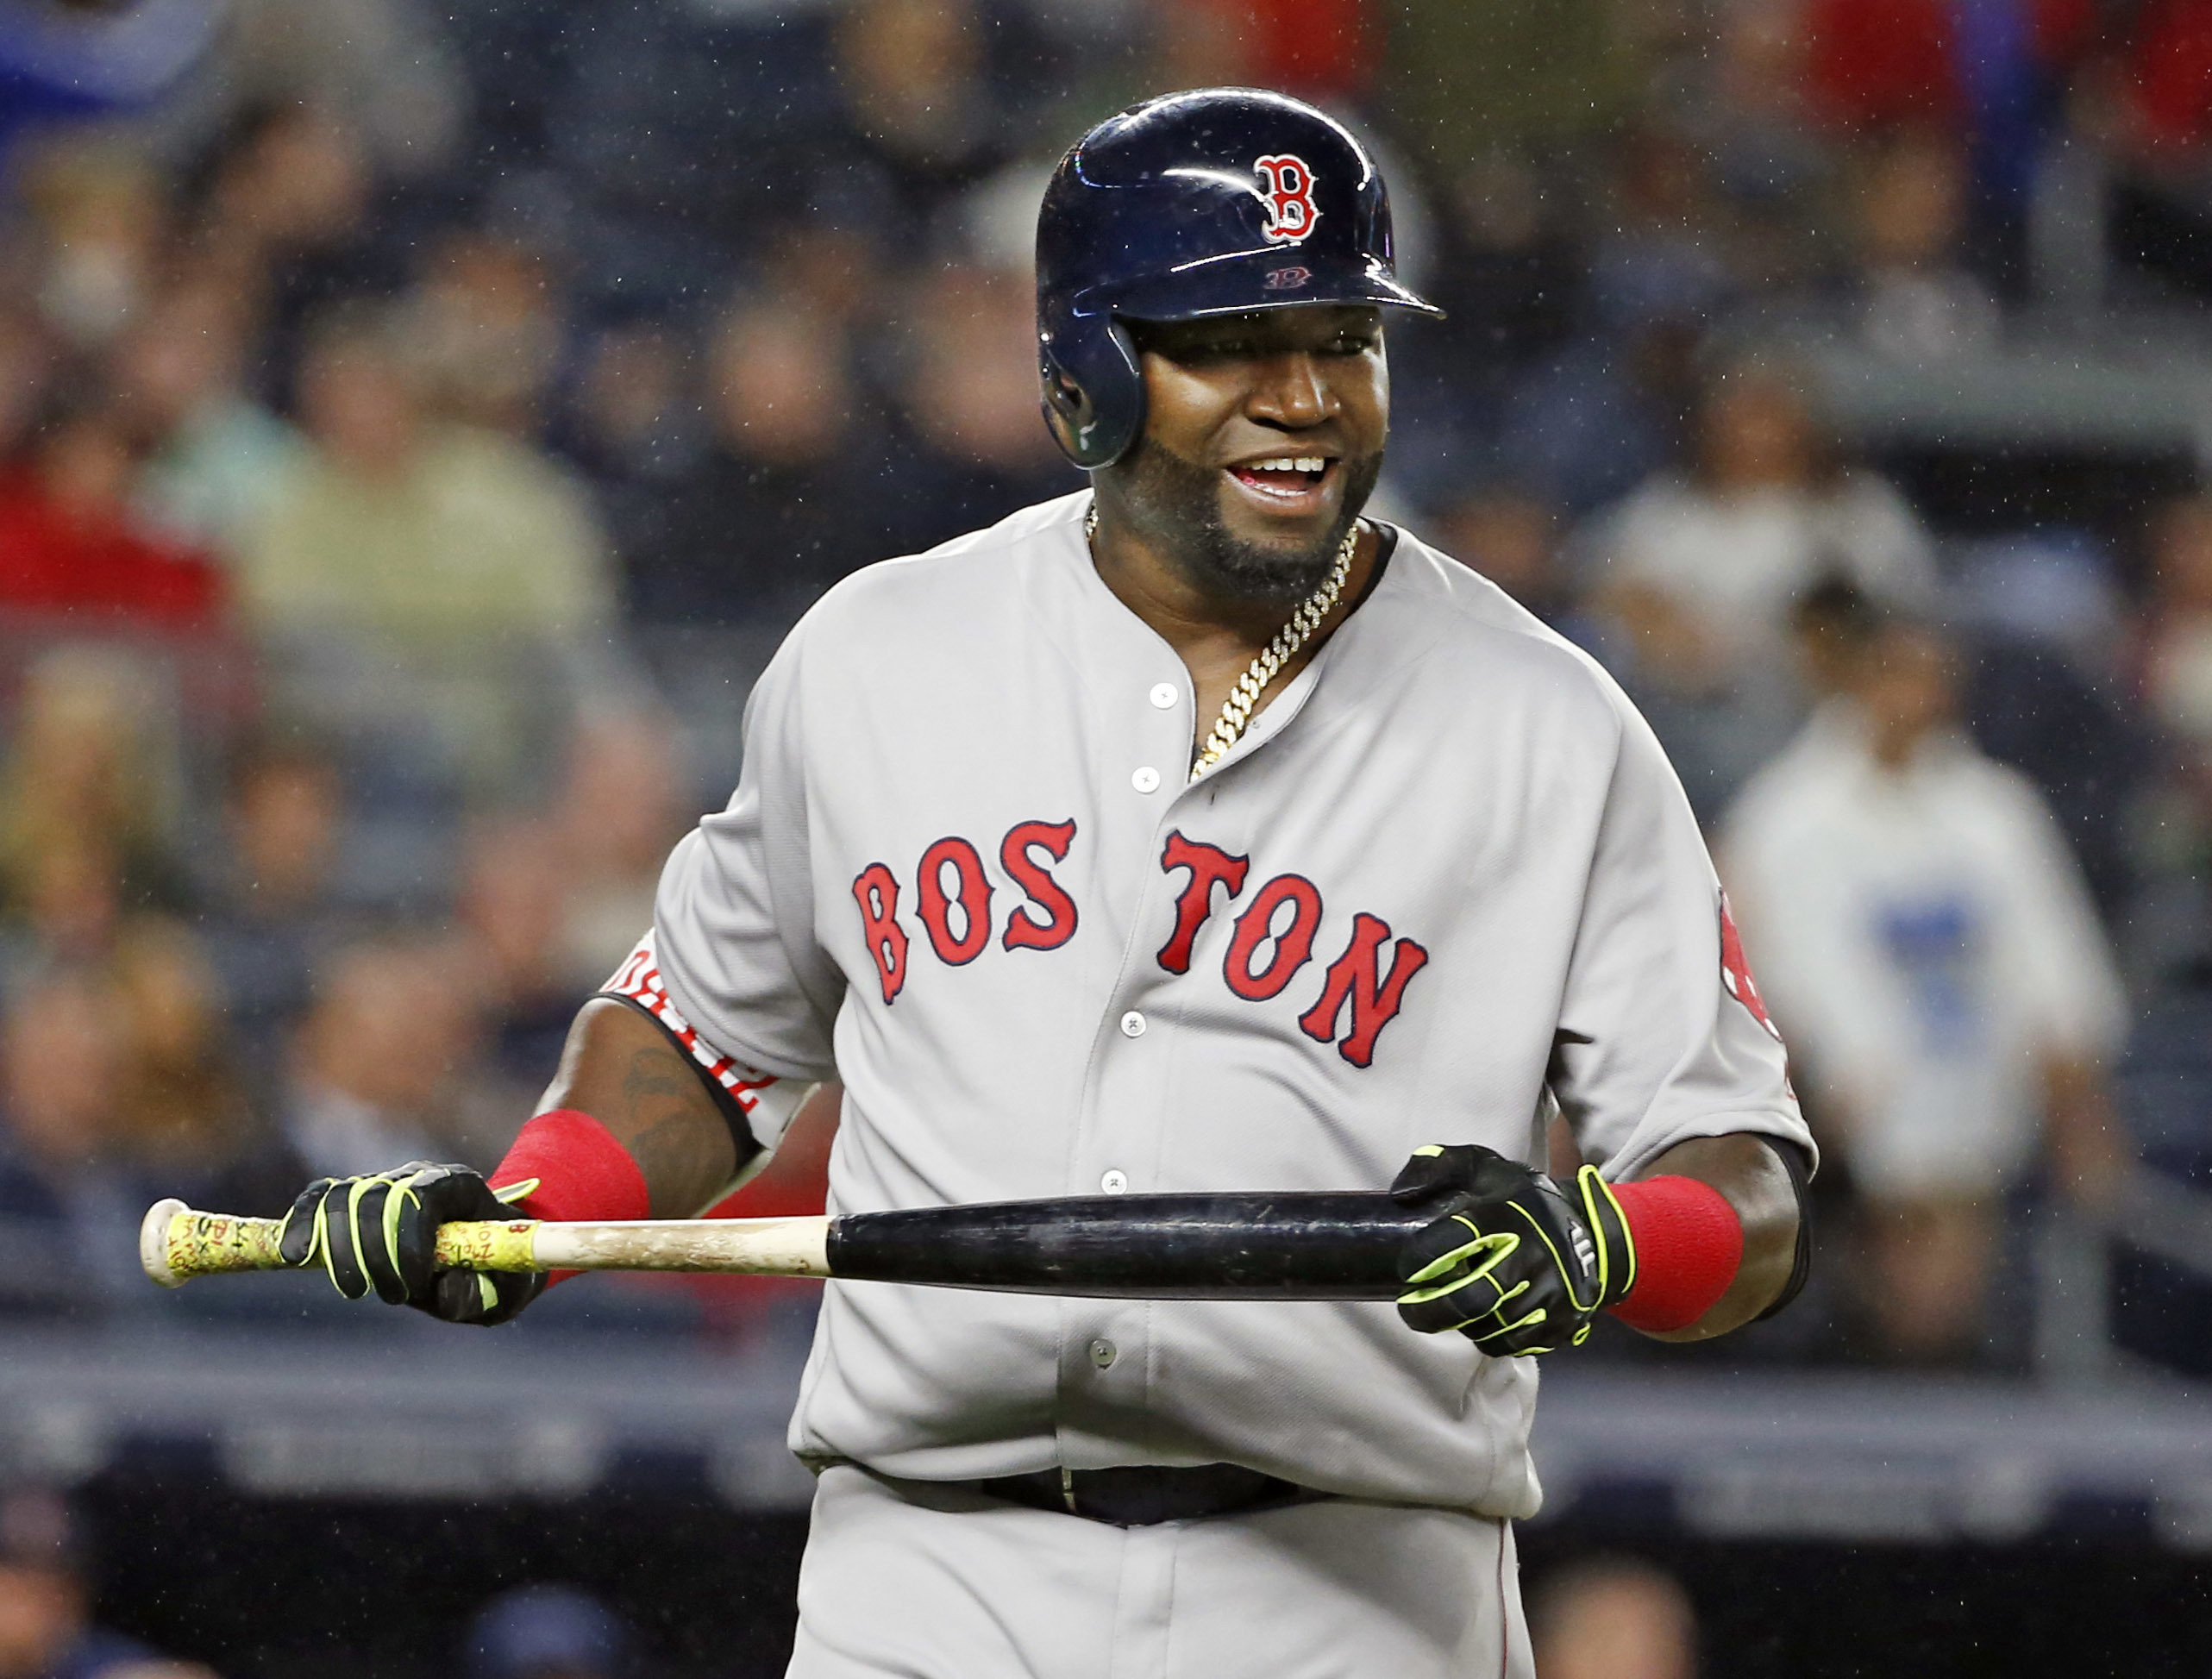 David Ortiz was targeted by drug kingpin in 2019 shooting, according to  private investigation